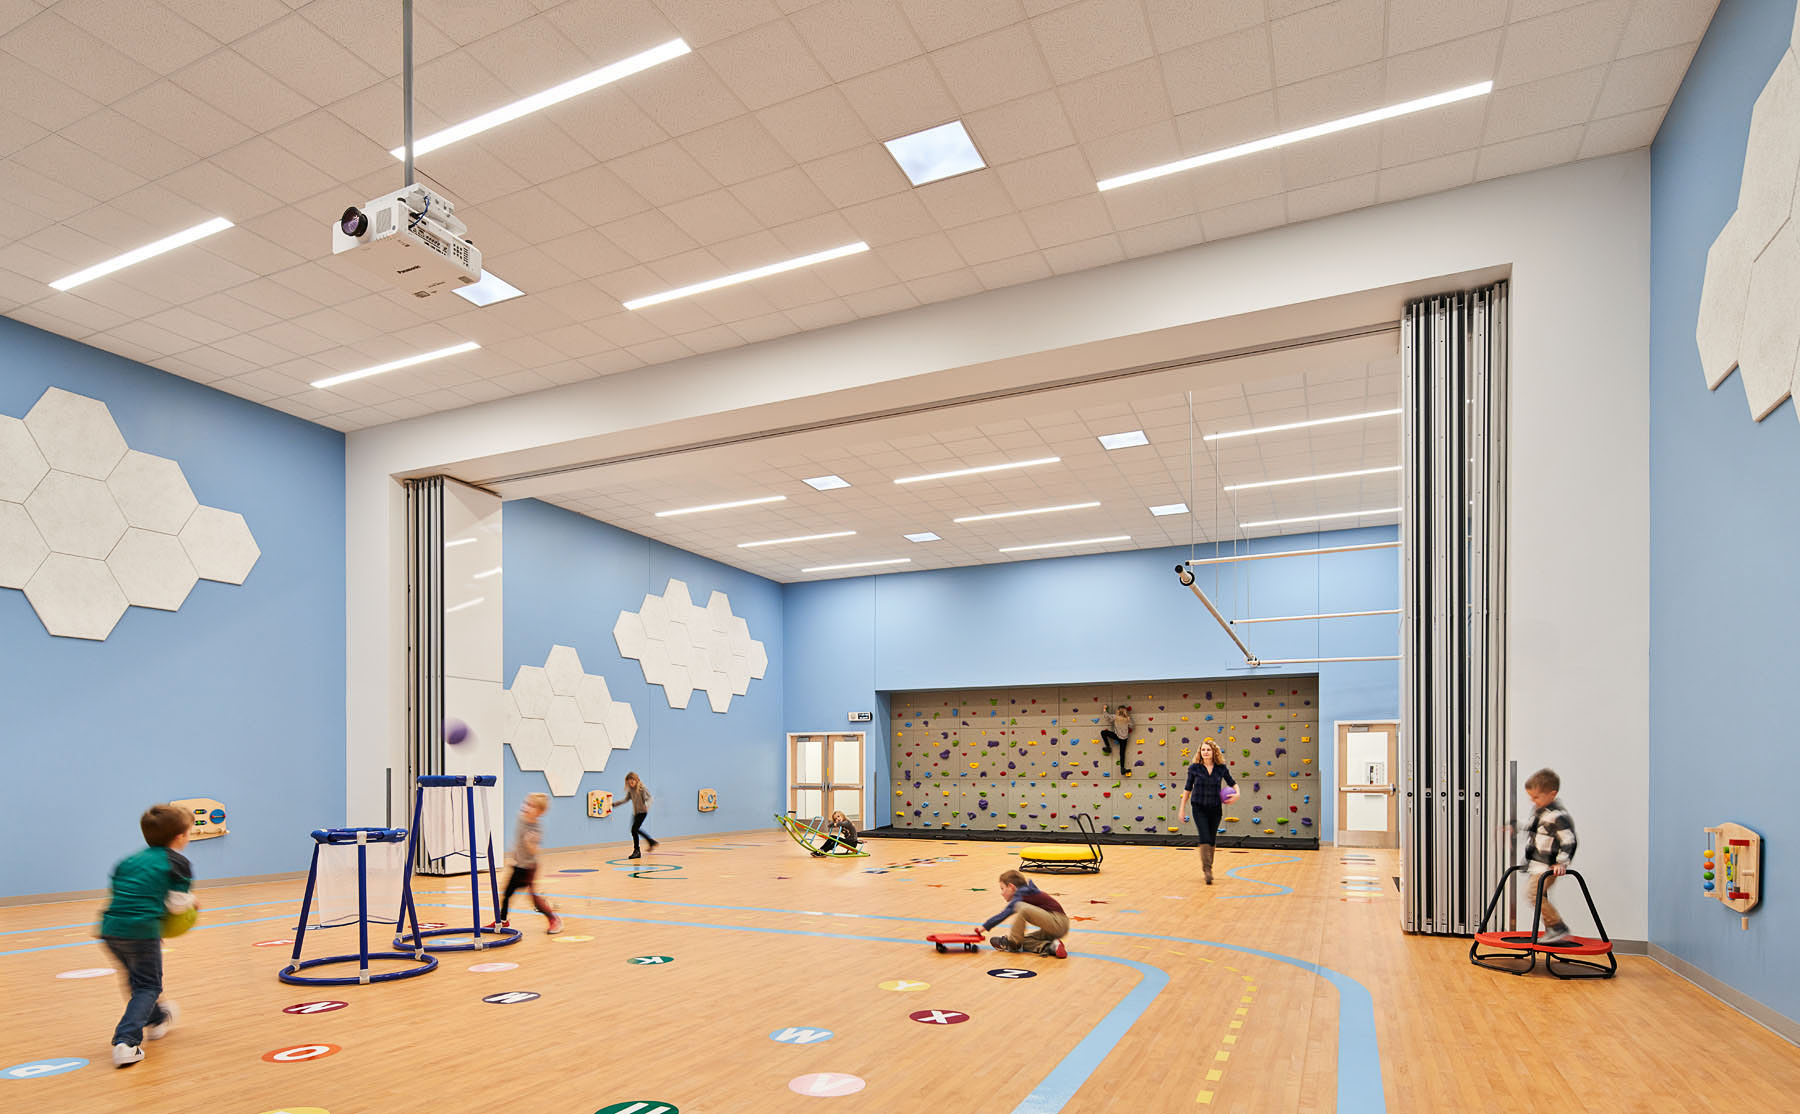 Children playing at the North Kansas city Schools Early Education Center built by McCownGordon